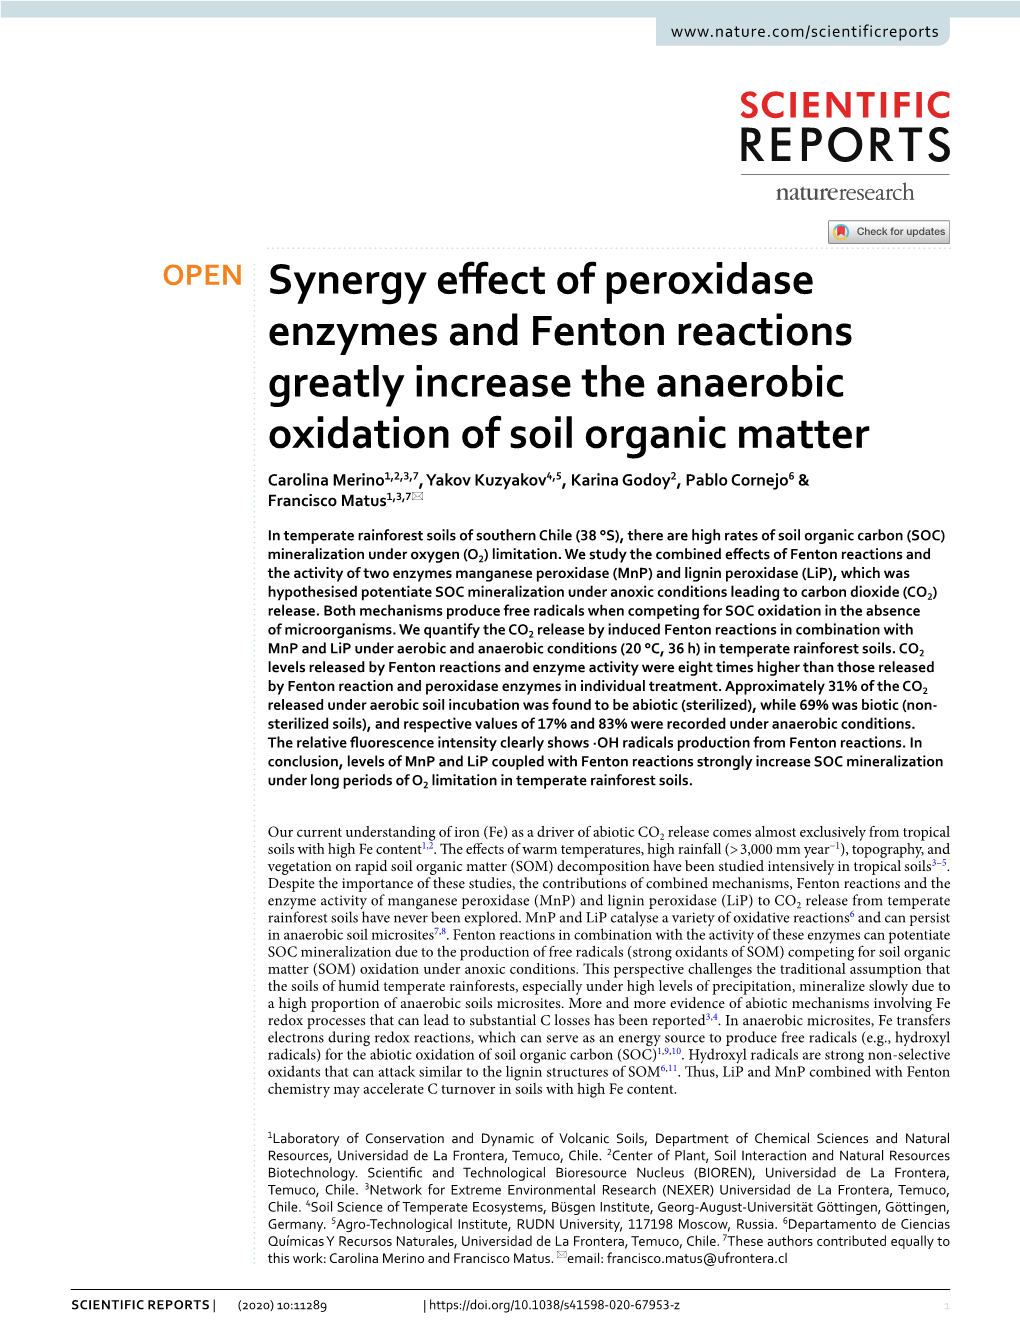 Synergy Effect of Peroxidase Enzymes and Fenton Reactions